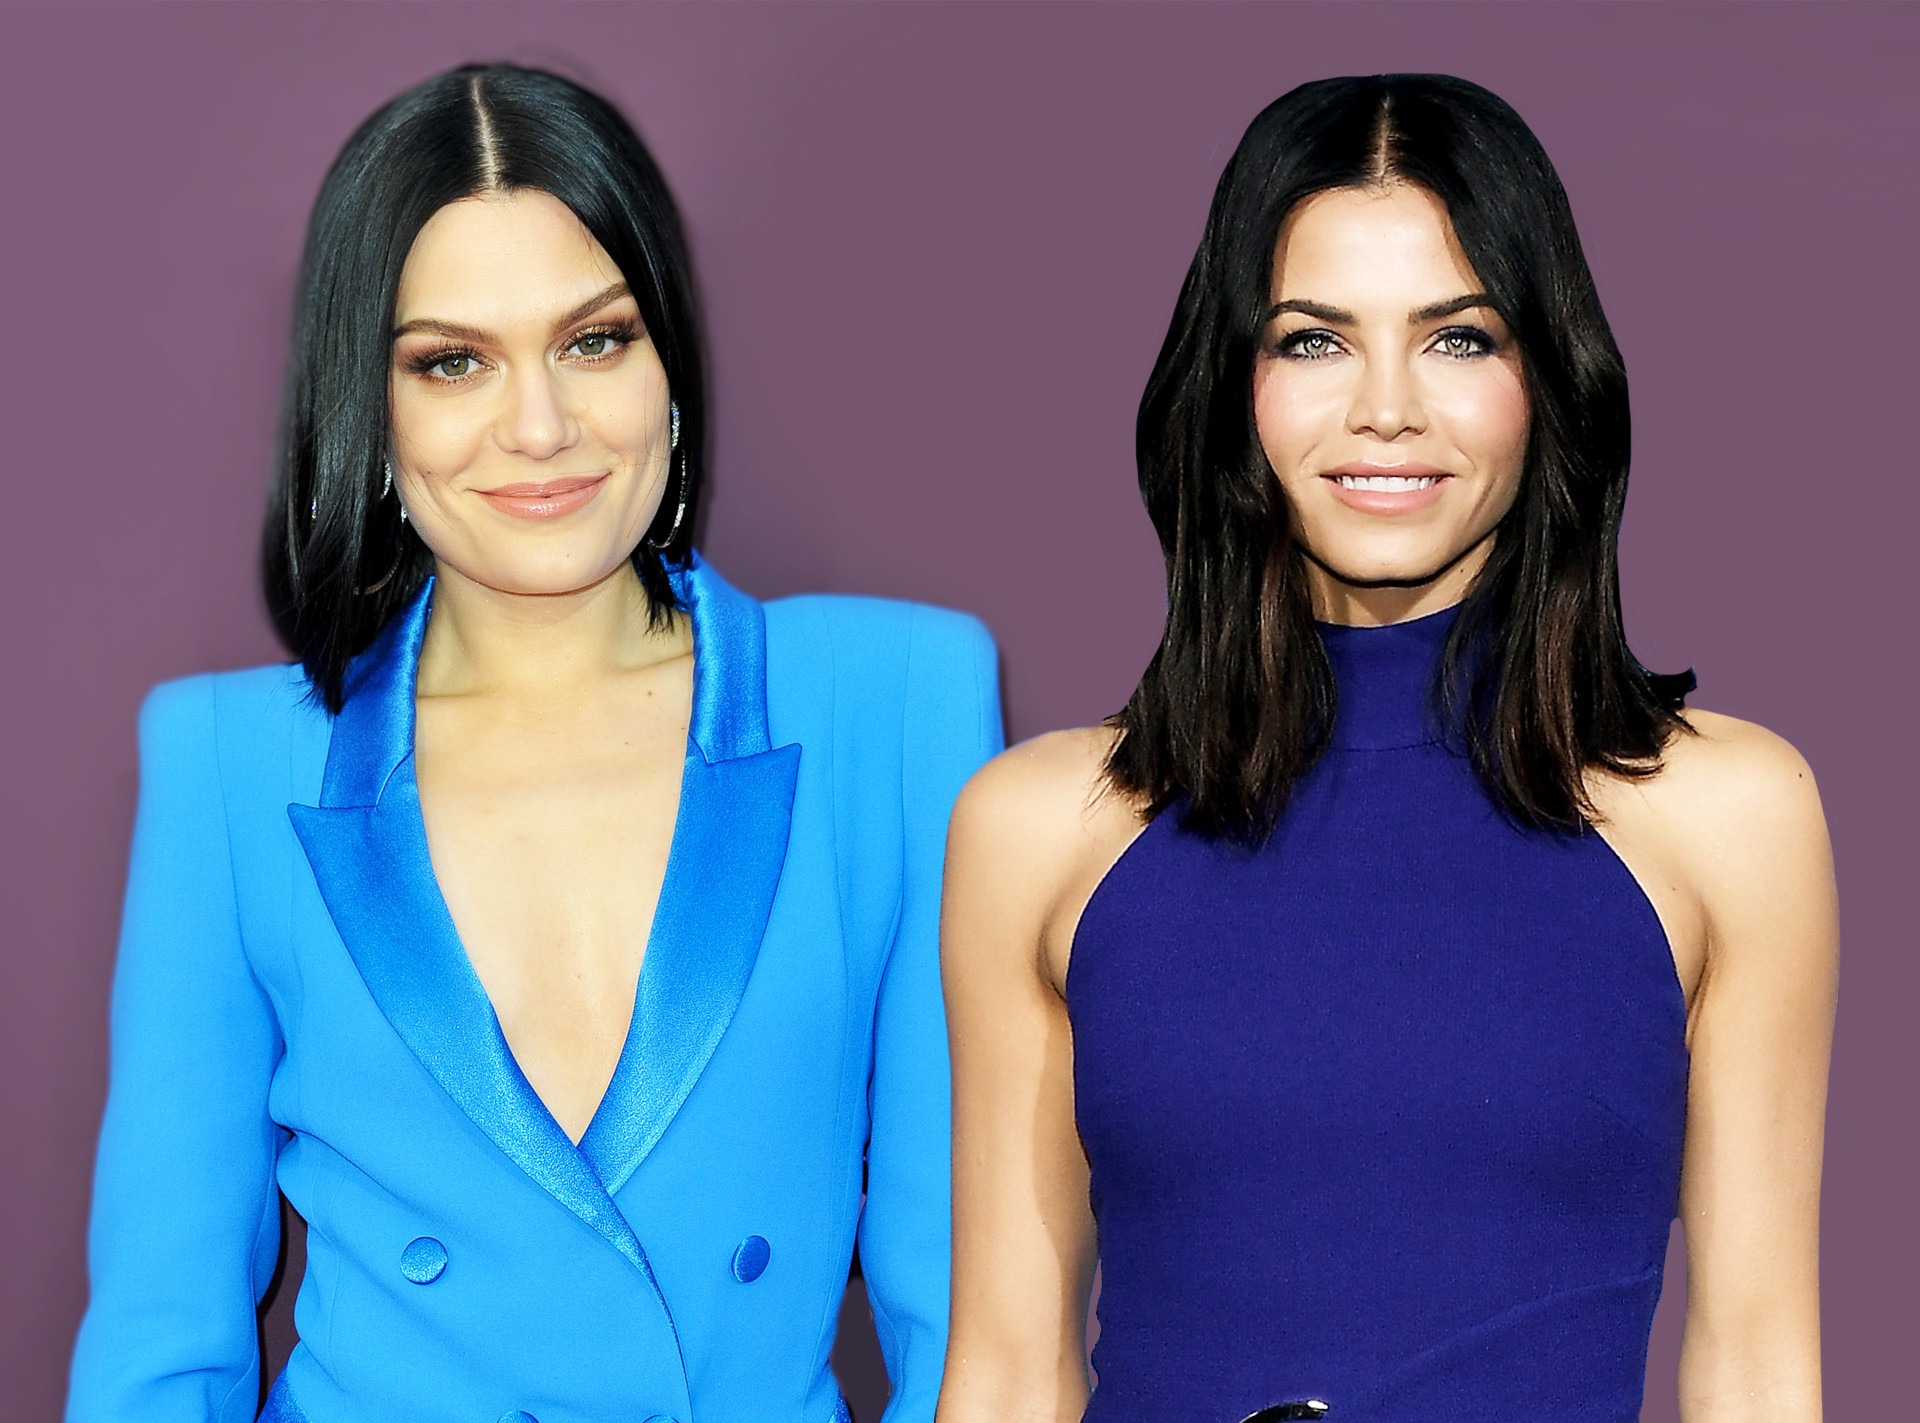 Let's Talk About How Jenna Dewan Responded to Those Jessie J Look-Alike Claims | E! News